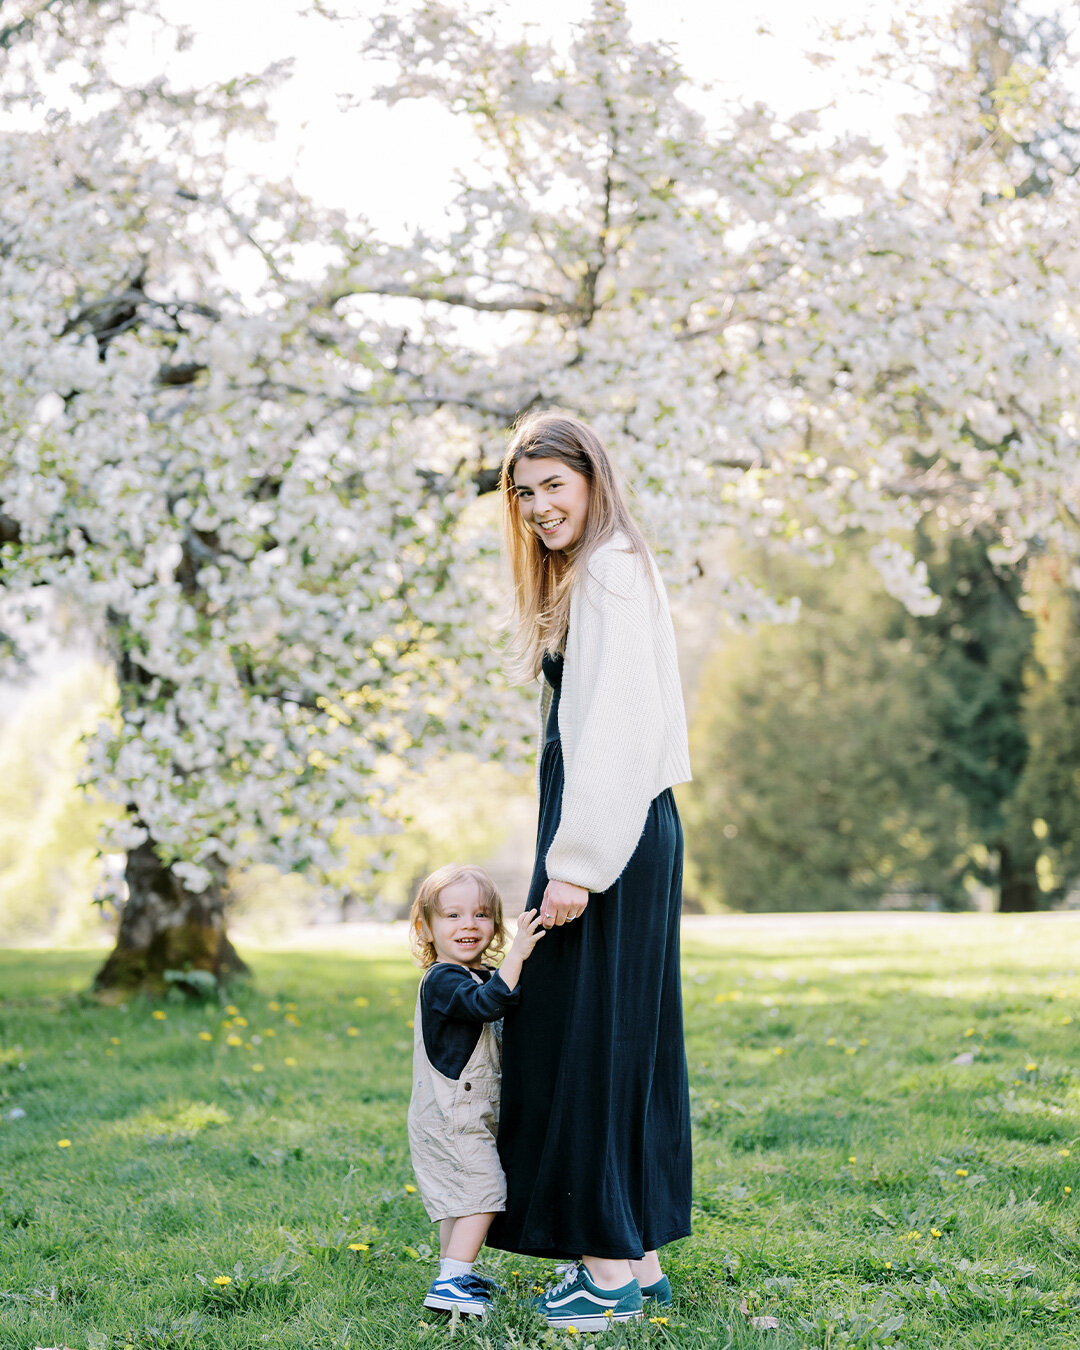 Is that spring in the air?! 🌸🩷 The cherry blossoms are budding and sunshine is making an appearance, yay! If you're interested in a cherry blossom session this year, please reach out asap.
.
.
.
.
.
#mommyandme #motherhood #simplymothers #motherhoo